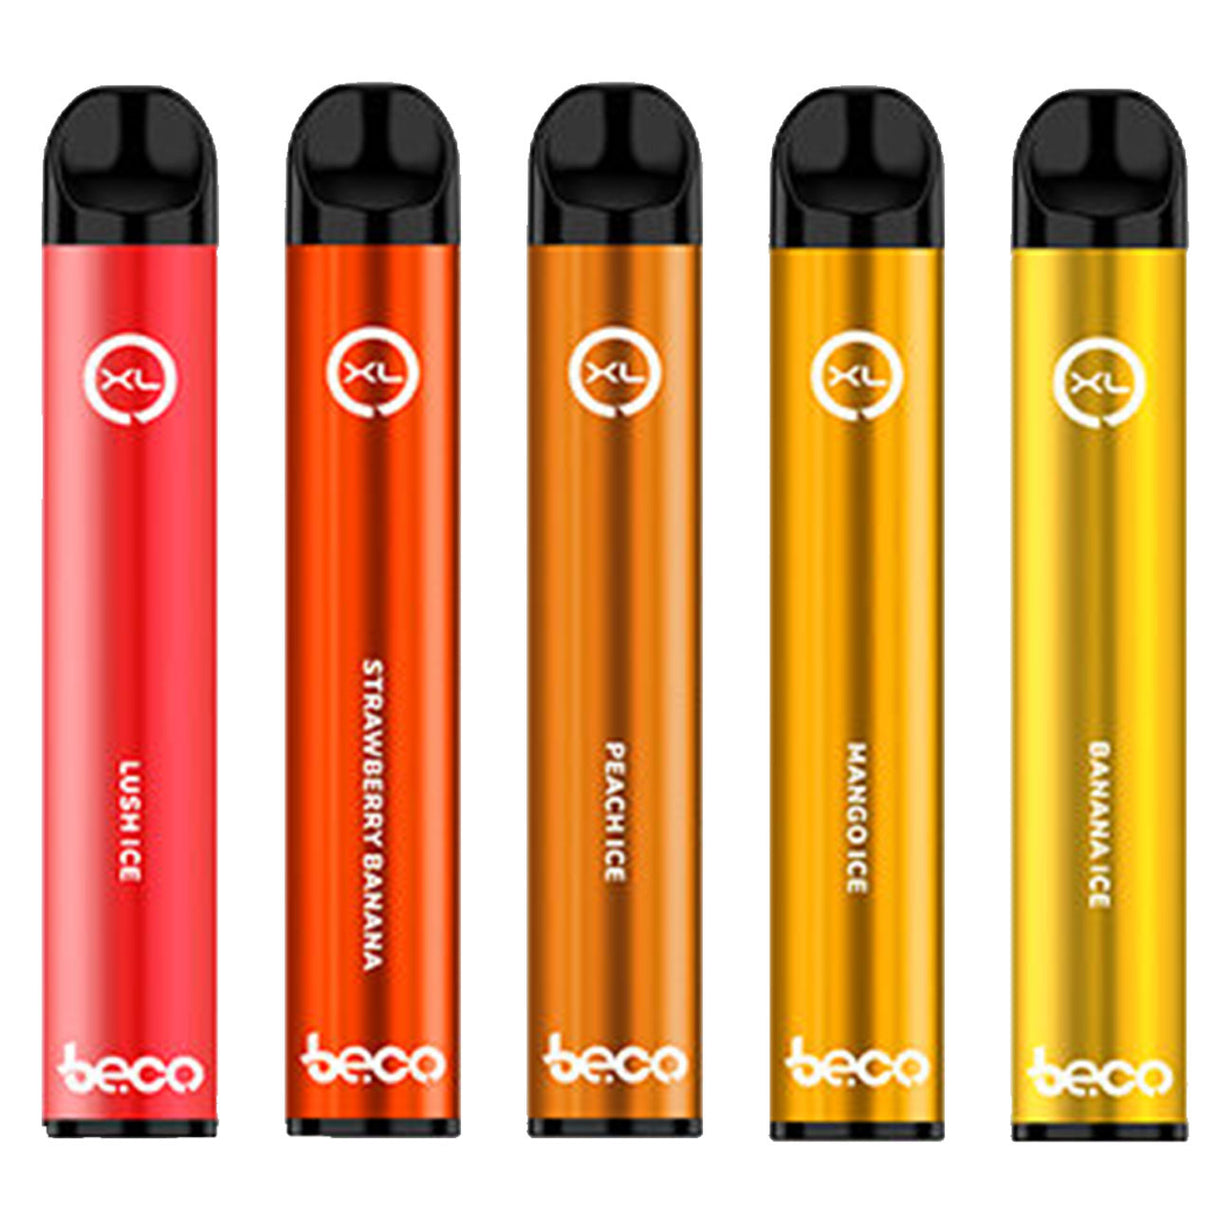 BECO XL Flavored Disposable E-Cig in a variety of flavor options.